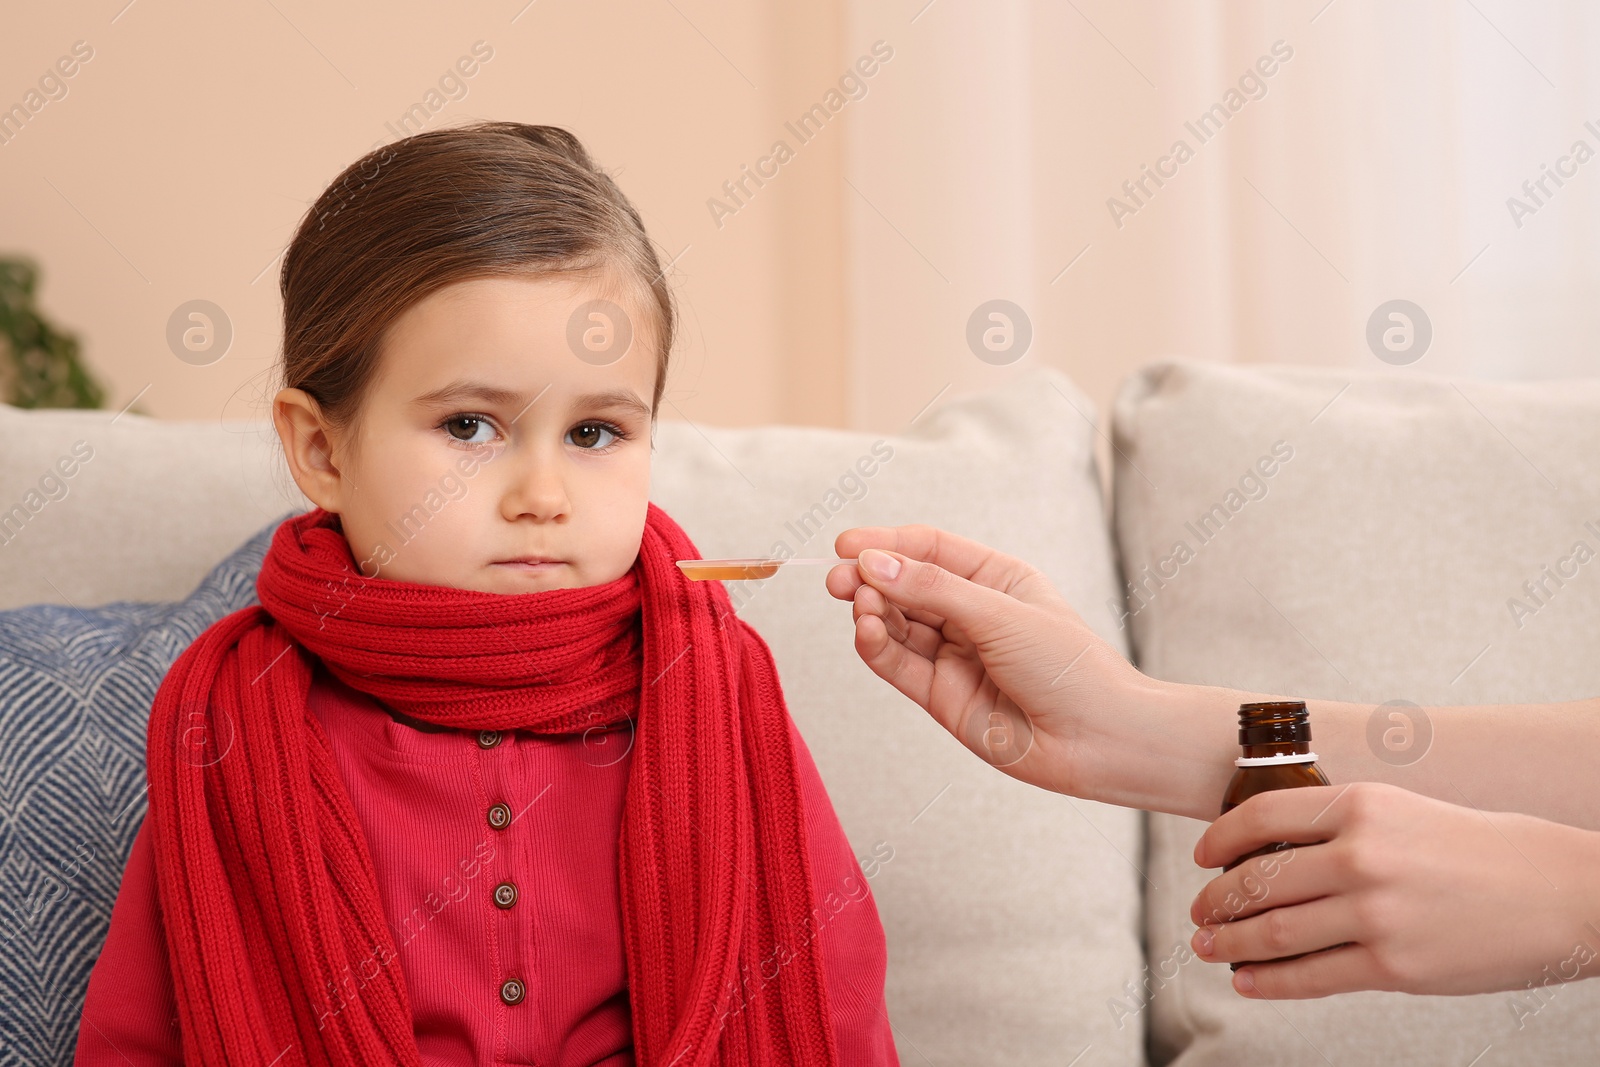 Photo of Mother giving cough syrup to her daughter on sofa indoors